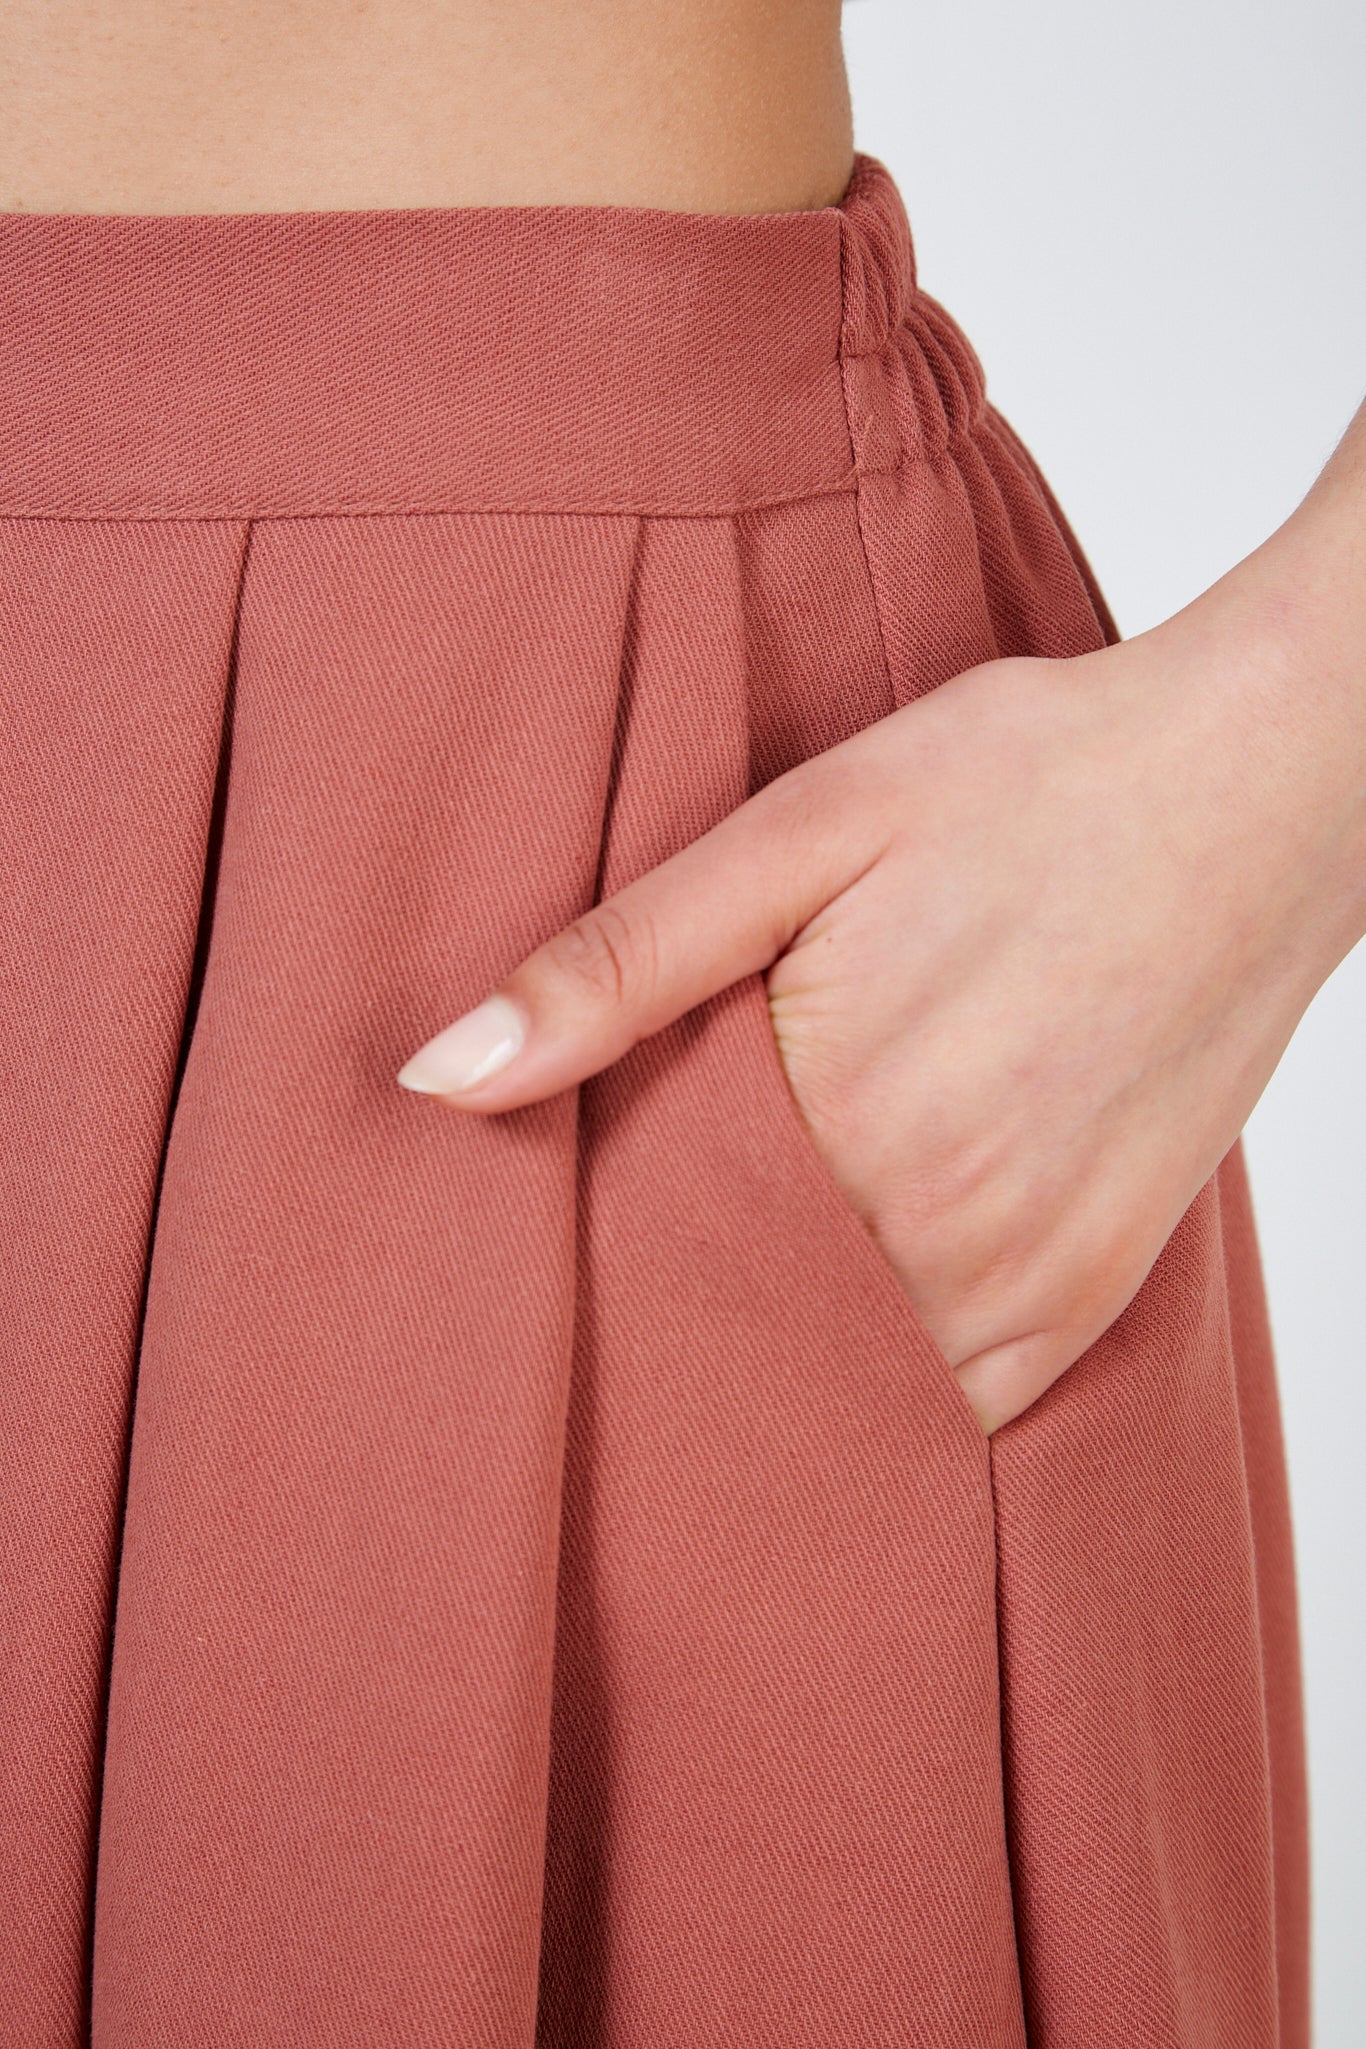 Rust red pleated skirt_4